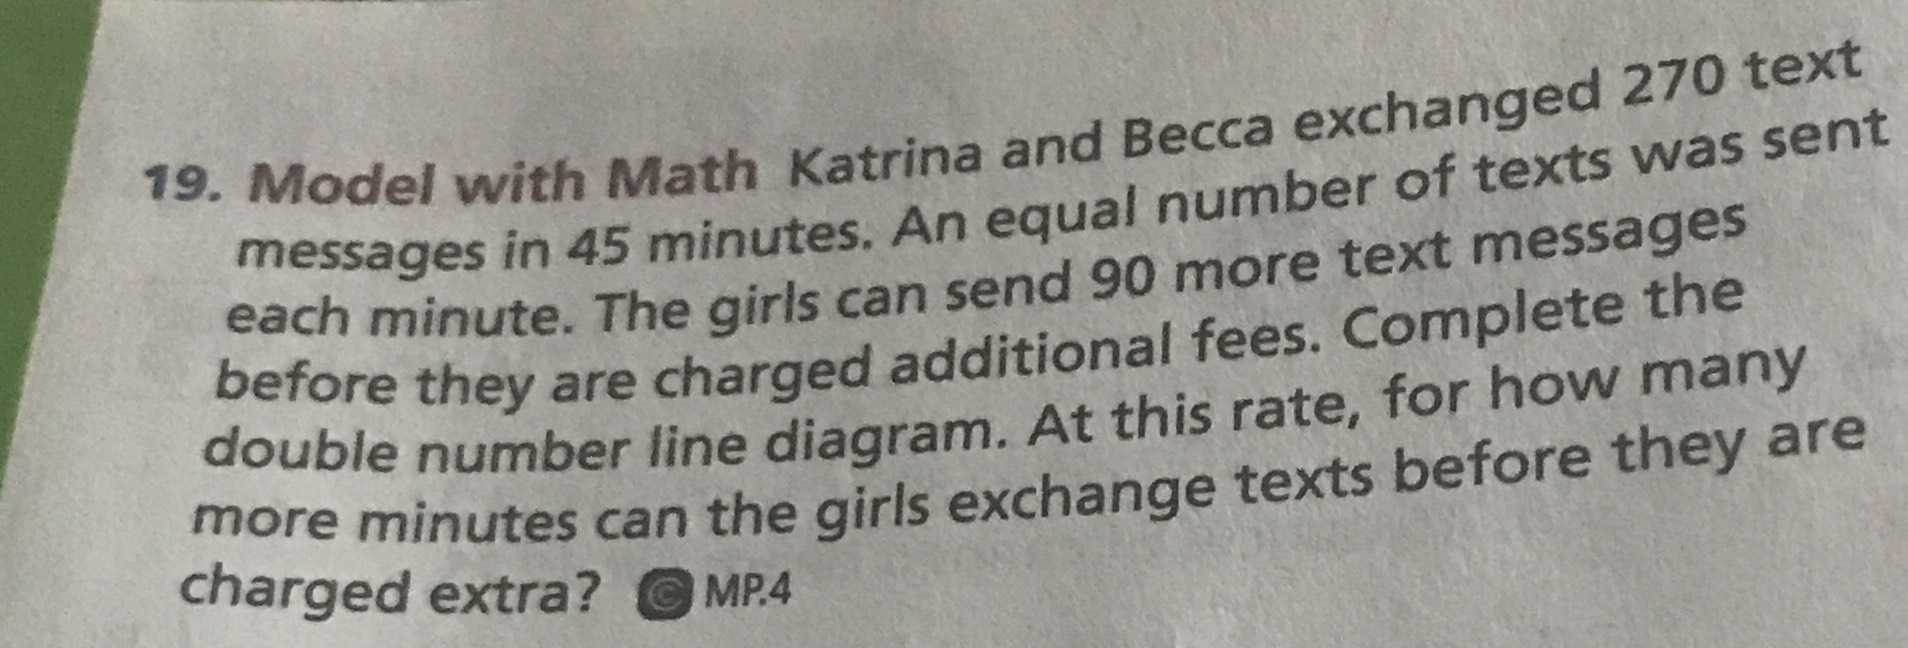 19. Model with Math Katrina and Becca exchanged \(...